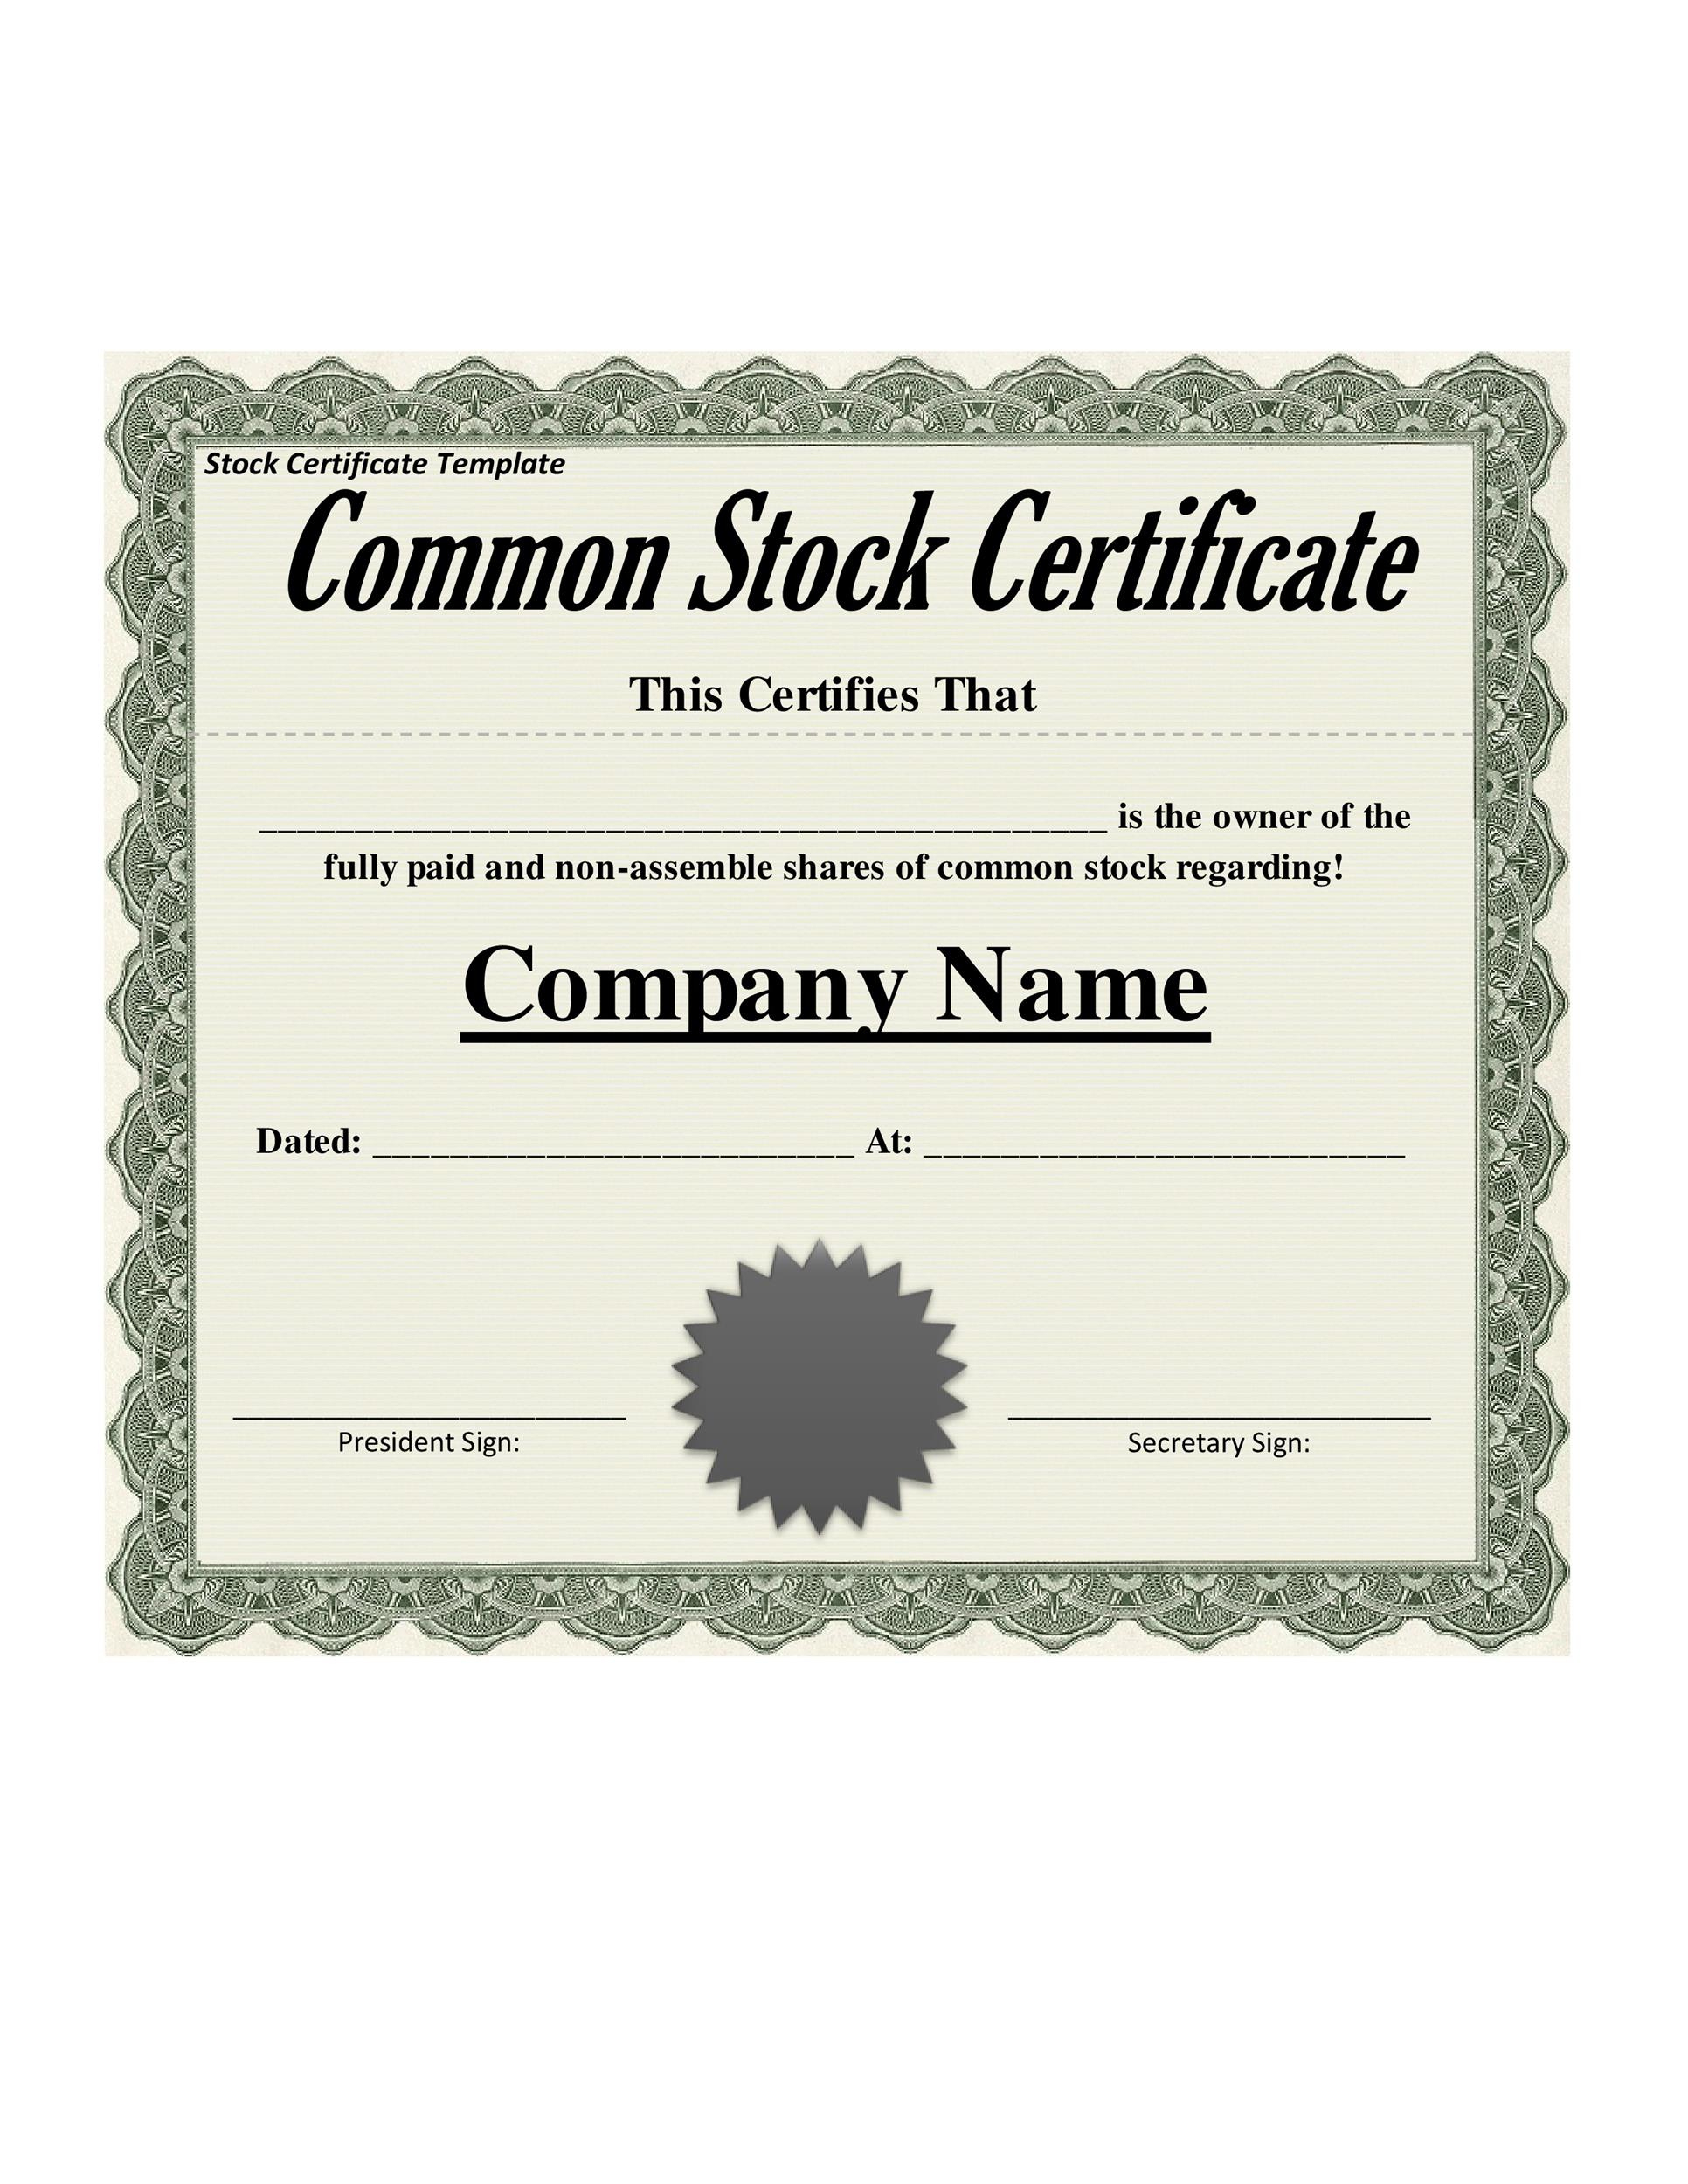 40+ Free Stock Certificate Templates (Word, Pdf) ᐅ Templatelab with regard to Template For Share Certificate